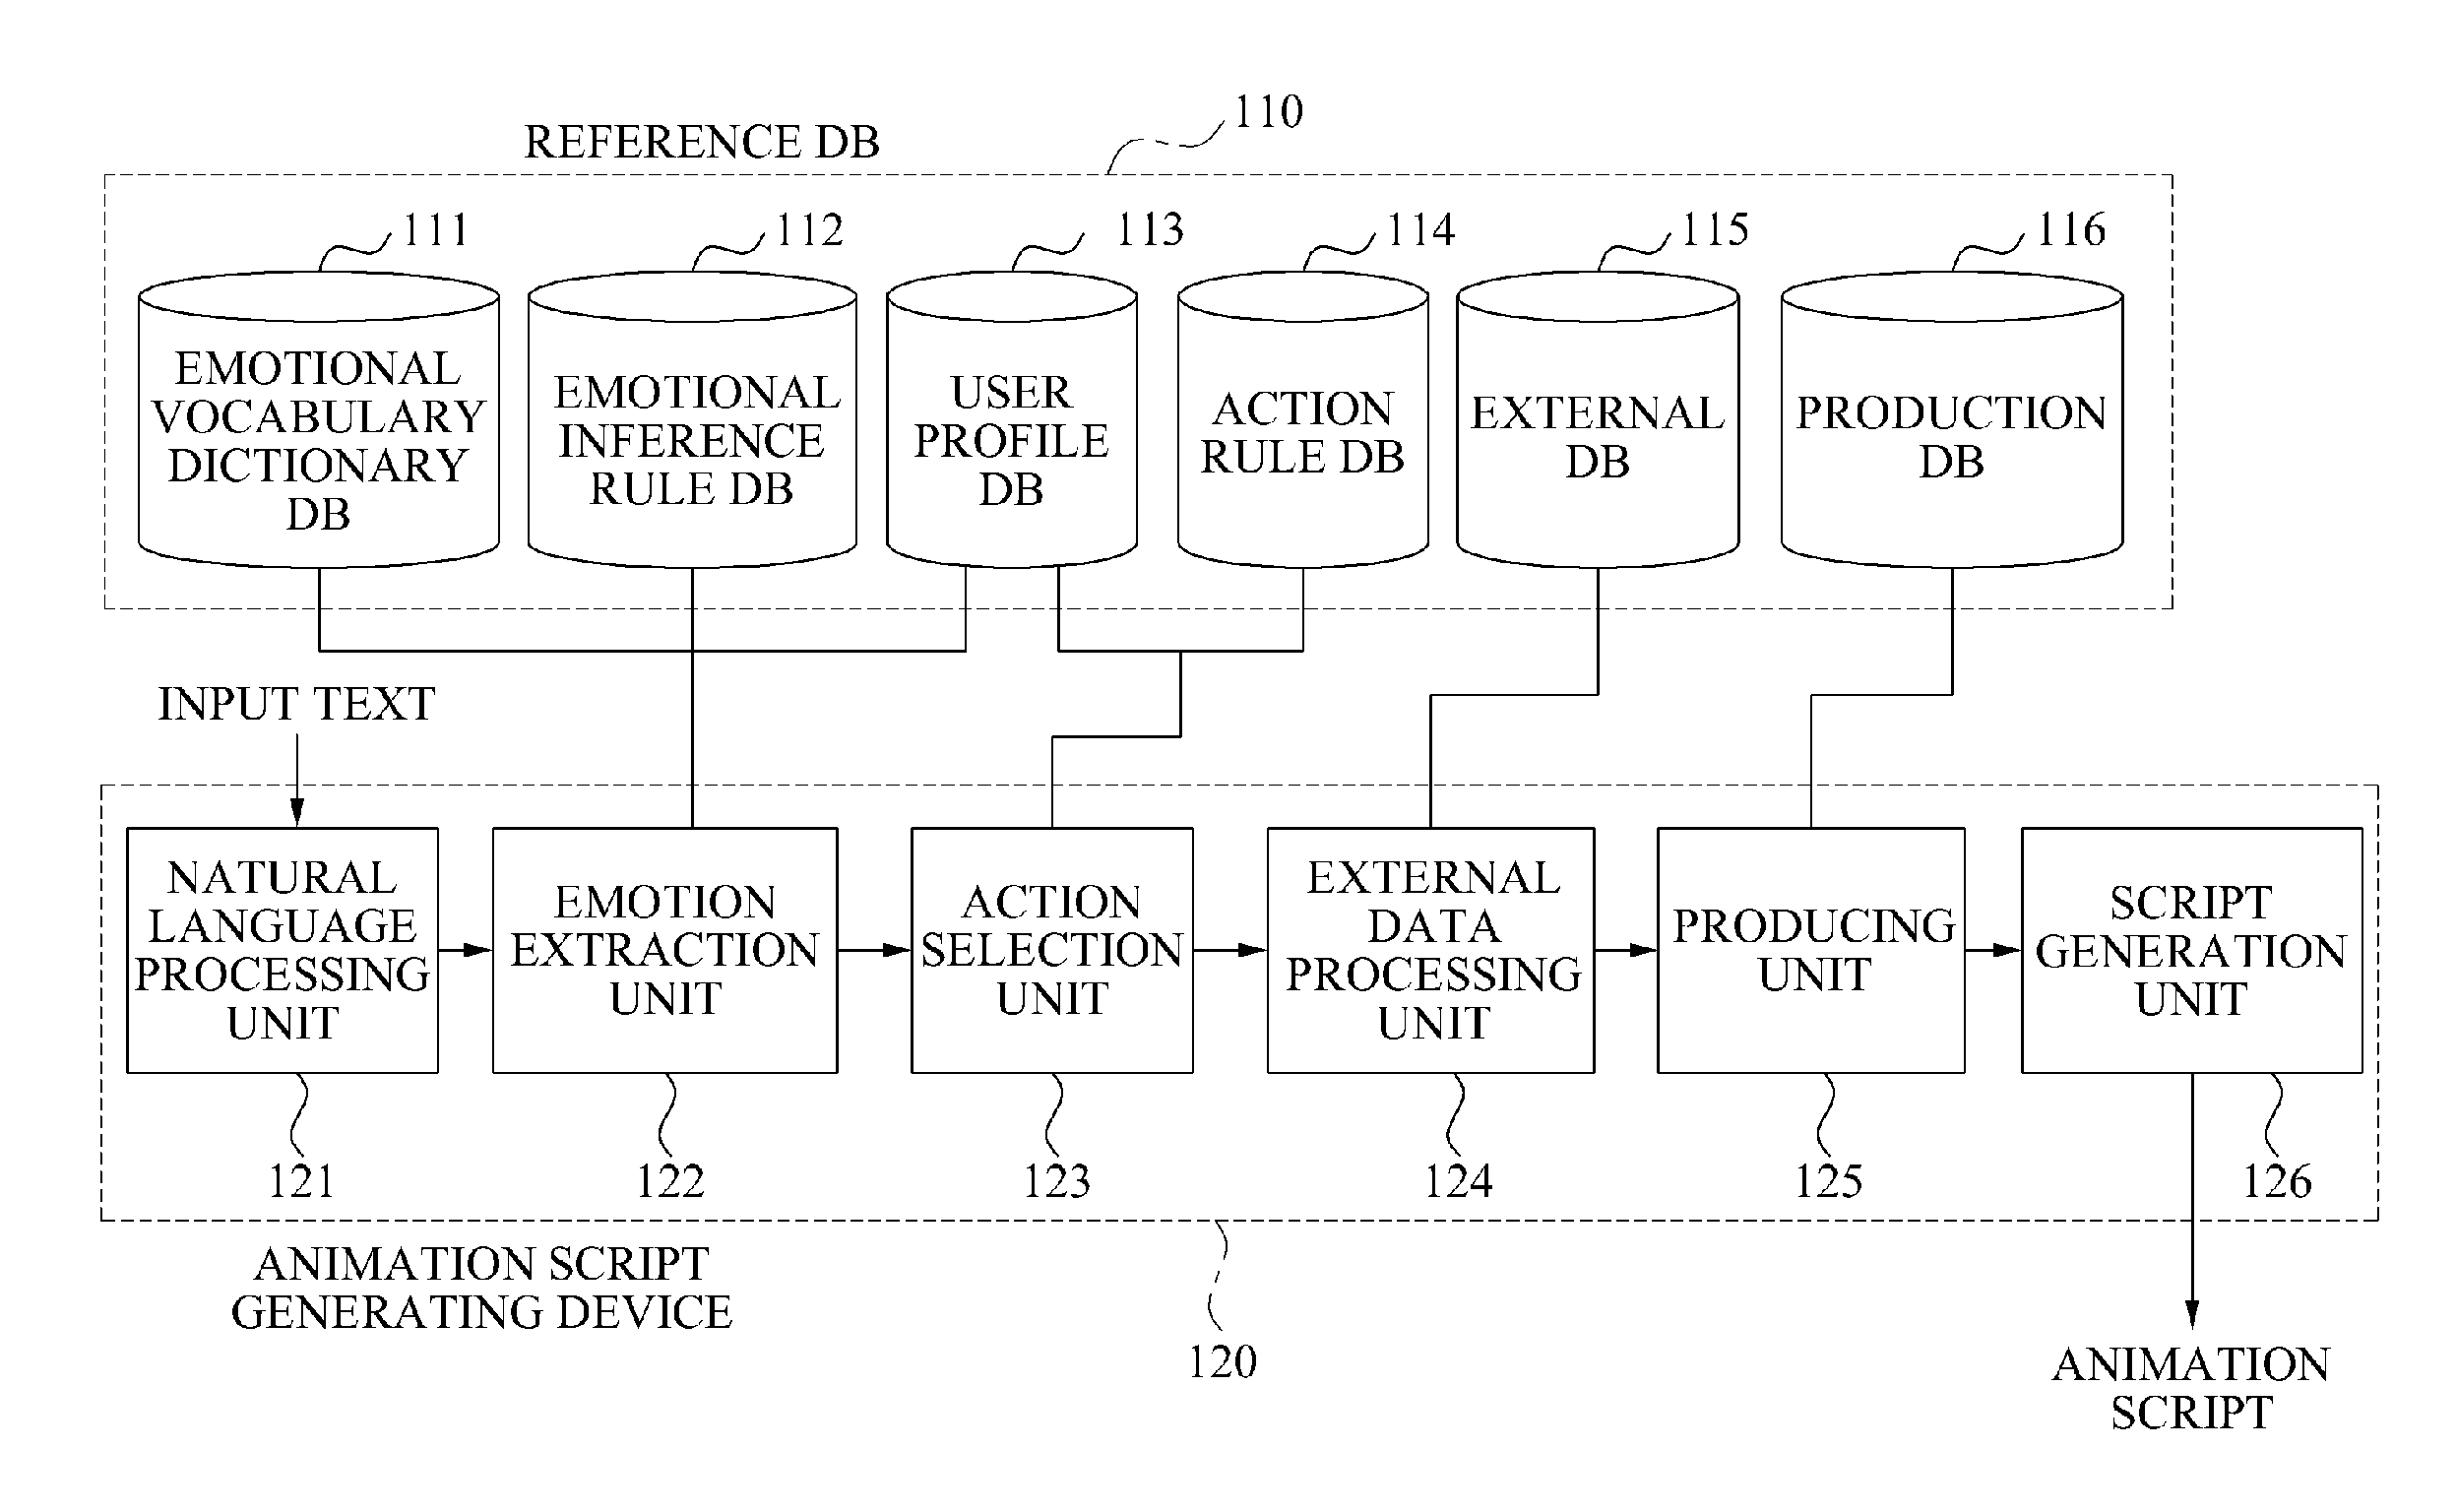 Animation system and methods for generating animation based on text-based data and user information